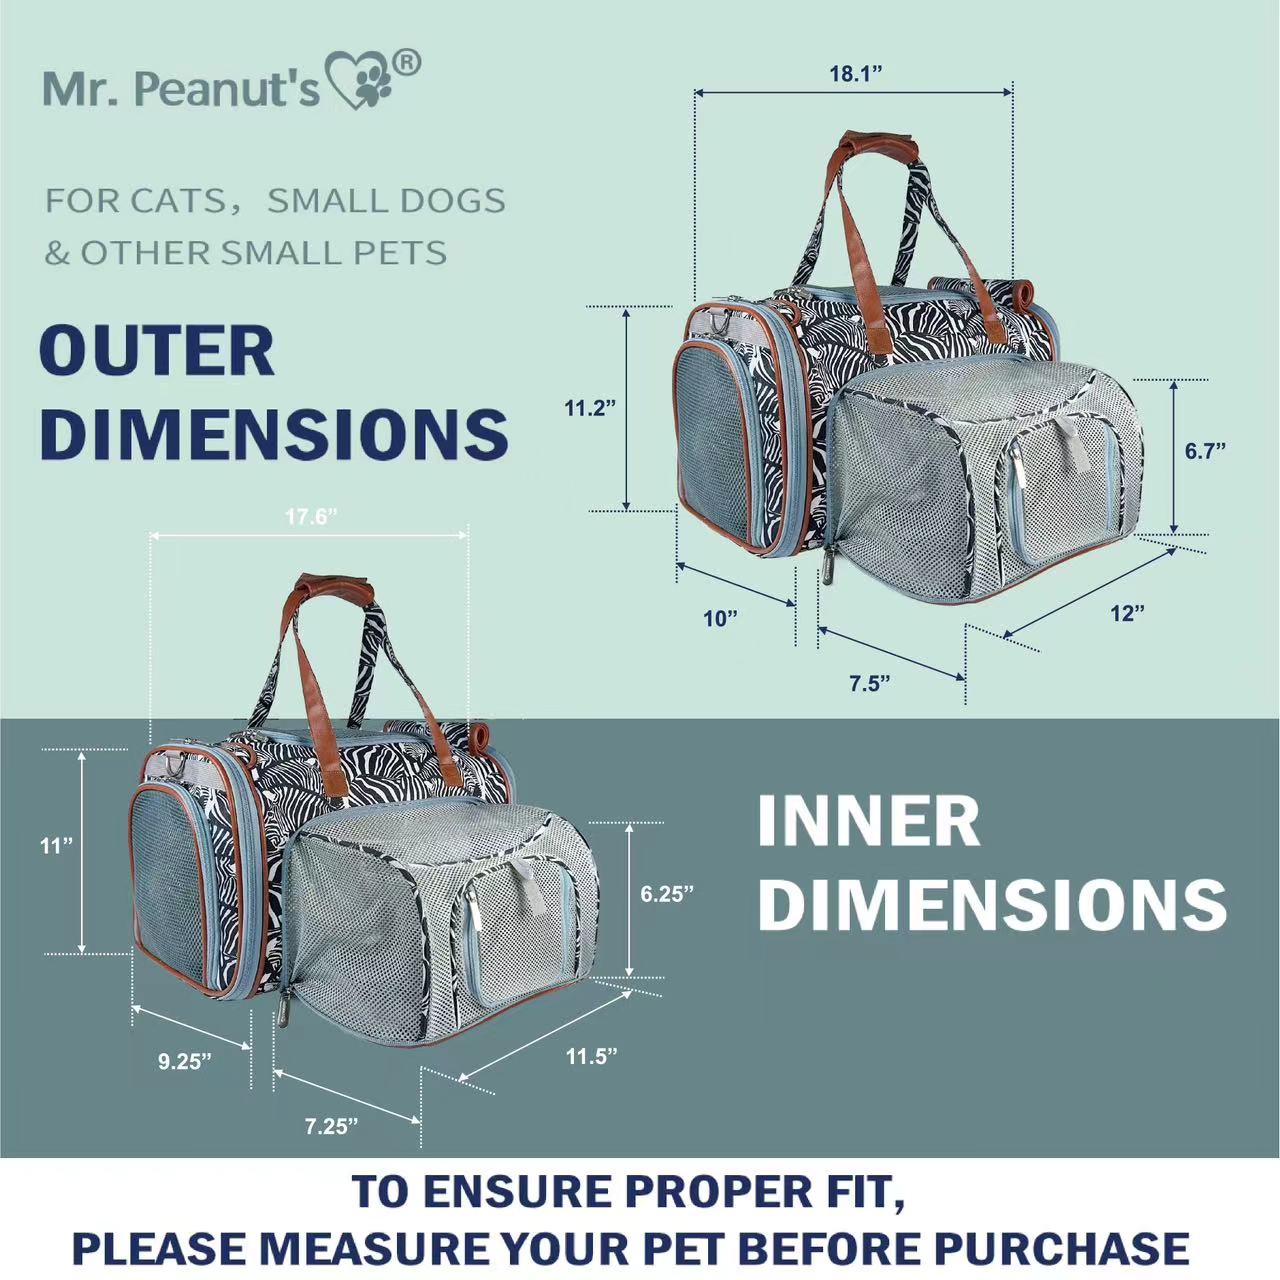 Gold Series Mini Expandable Airline Capable Pet Carrier - Low Profile, Soft  Sided Premium Tote - Charcoal Ash